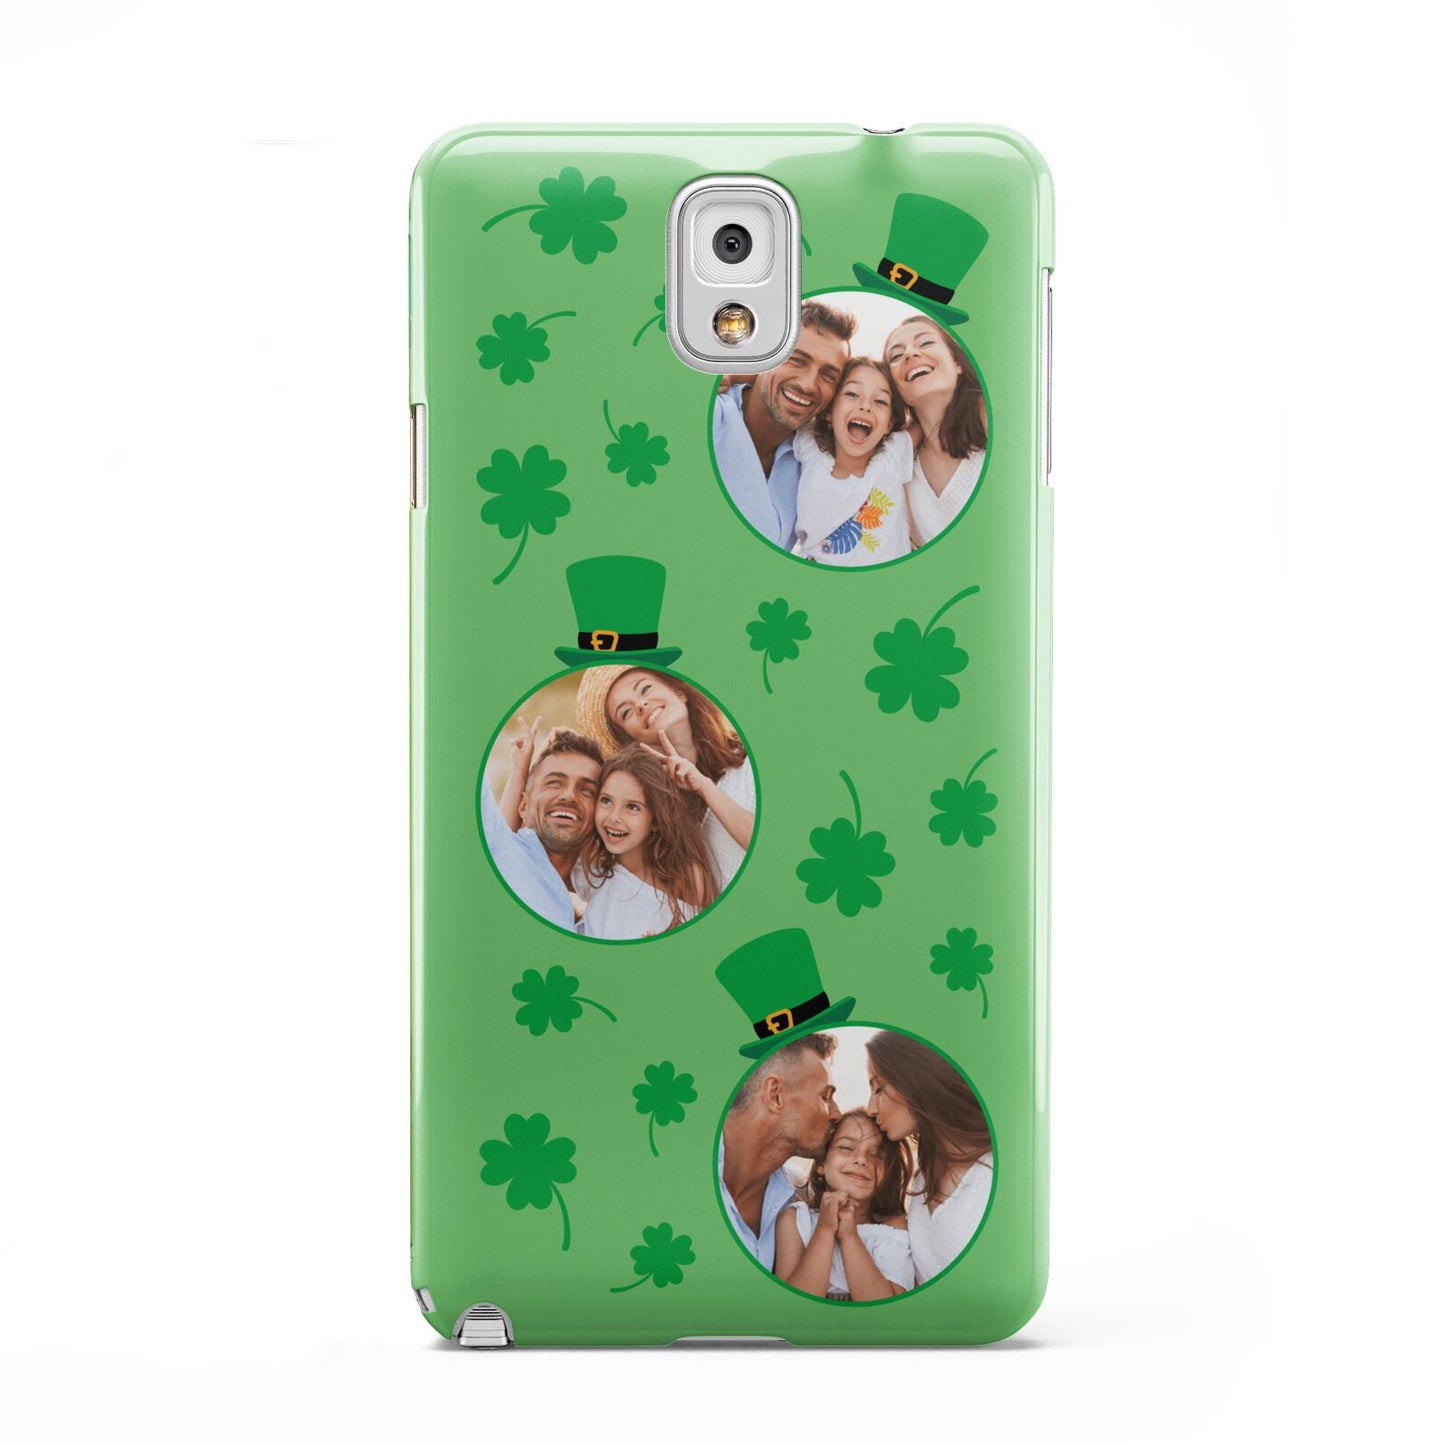 St Patricks Day Personalised Photo Samsung Galaxy Note 3 Case